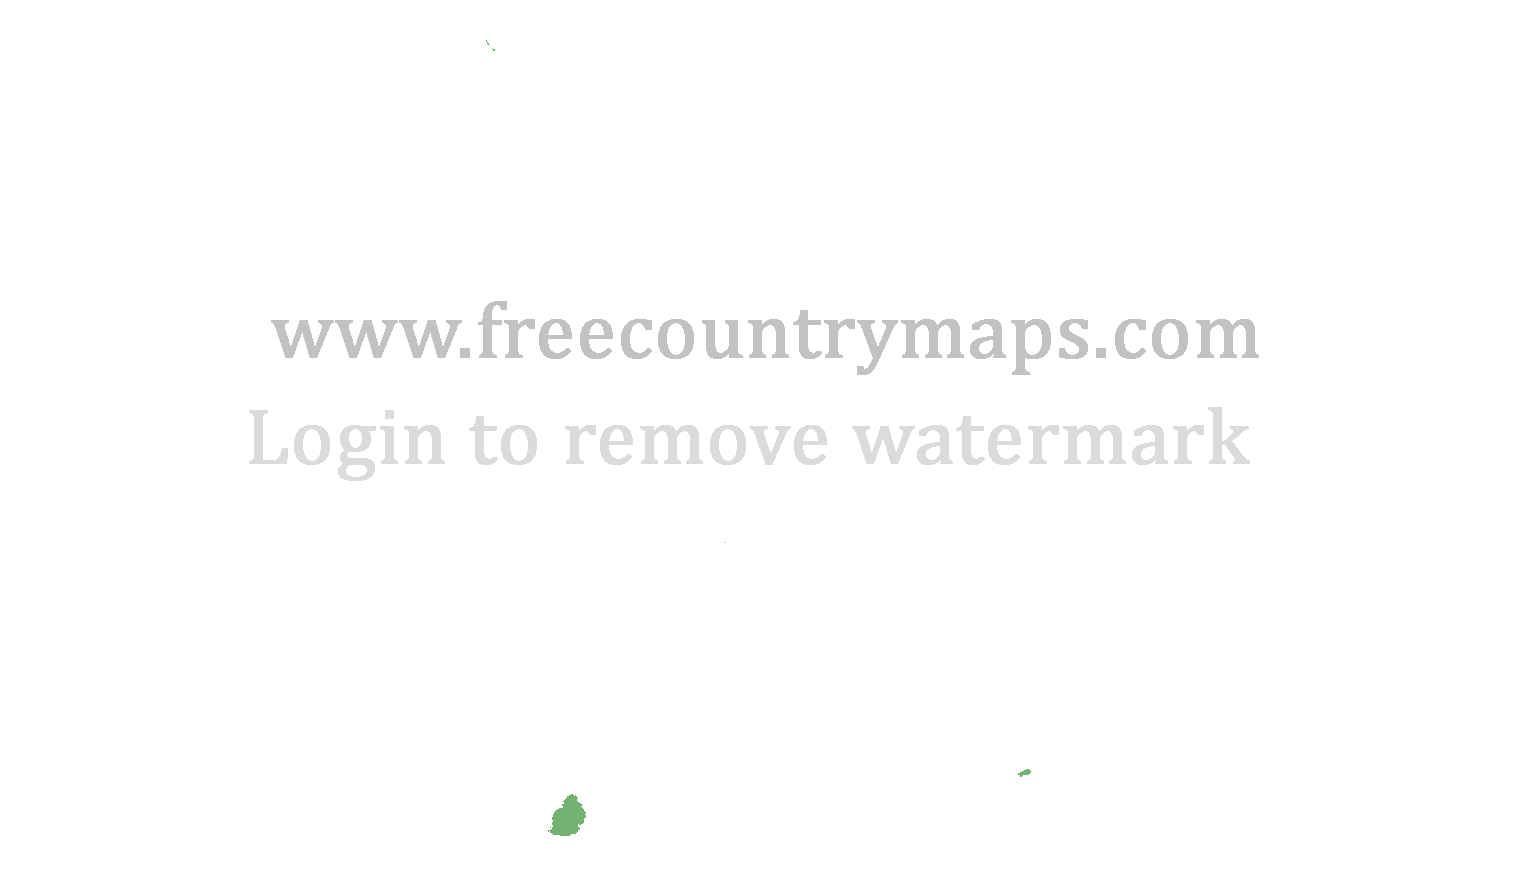 Blank Map of Mauritius